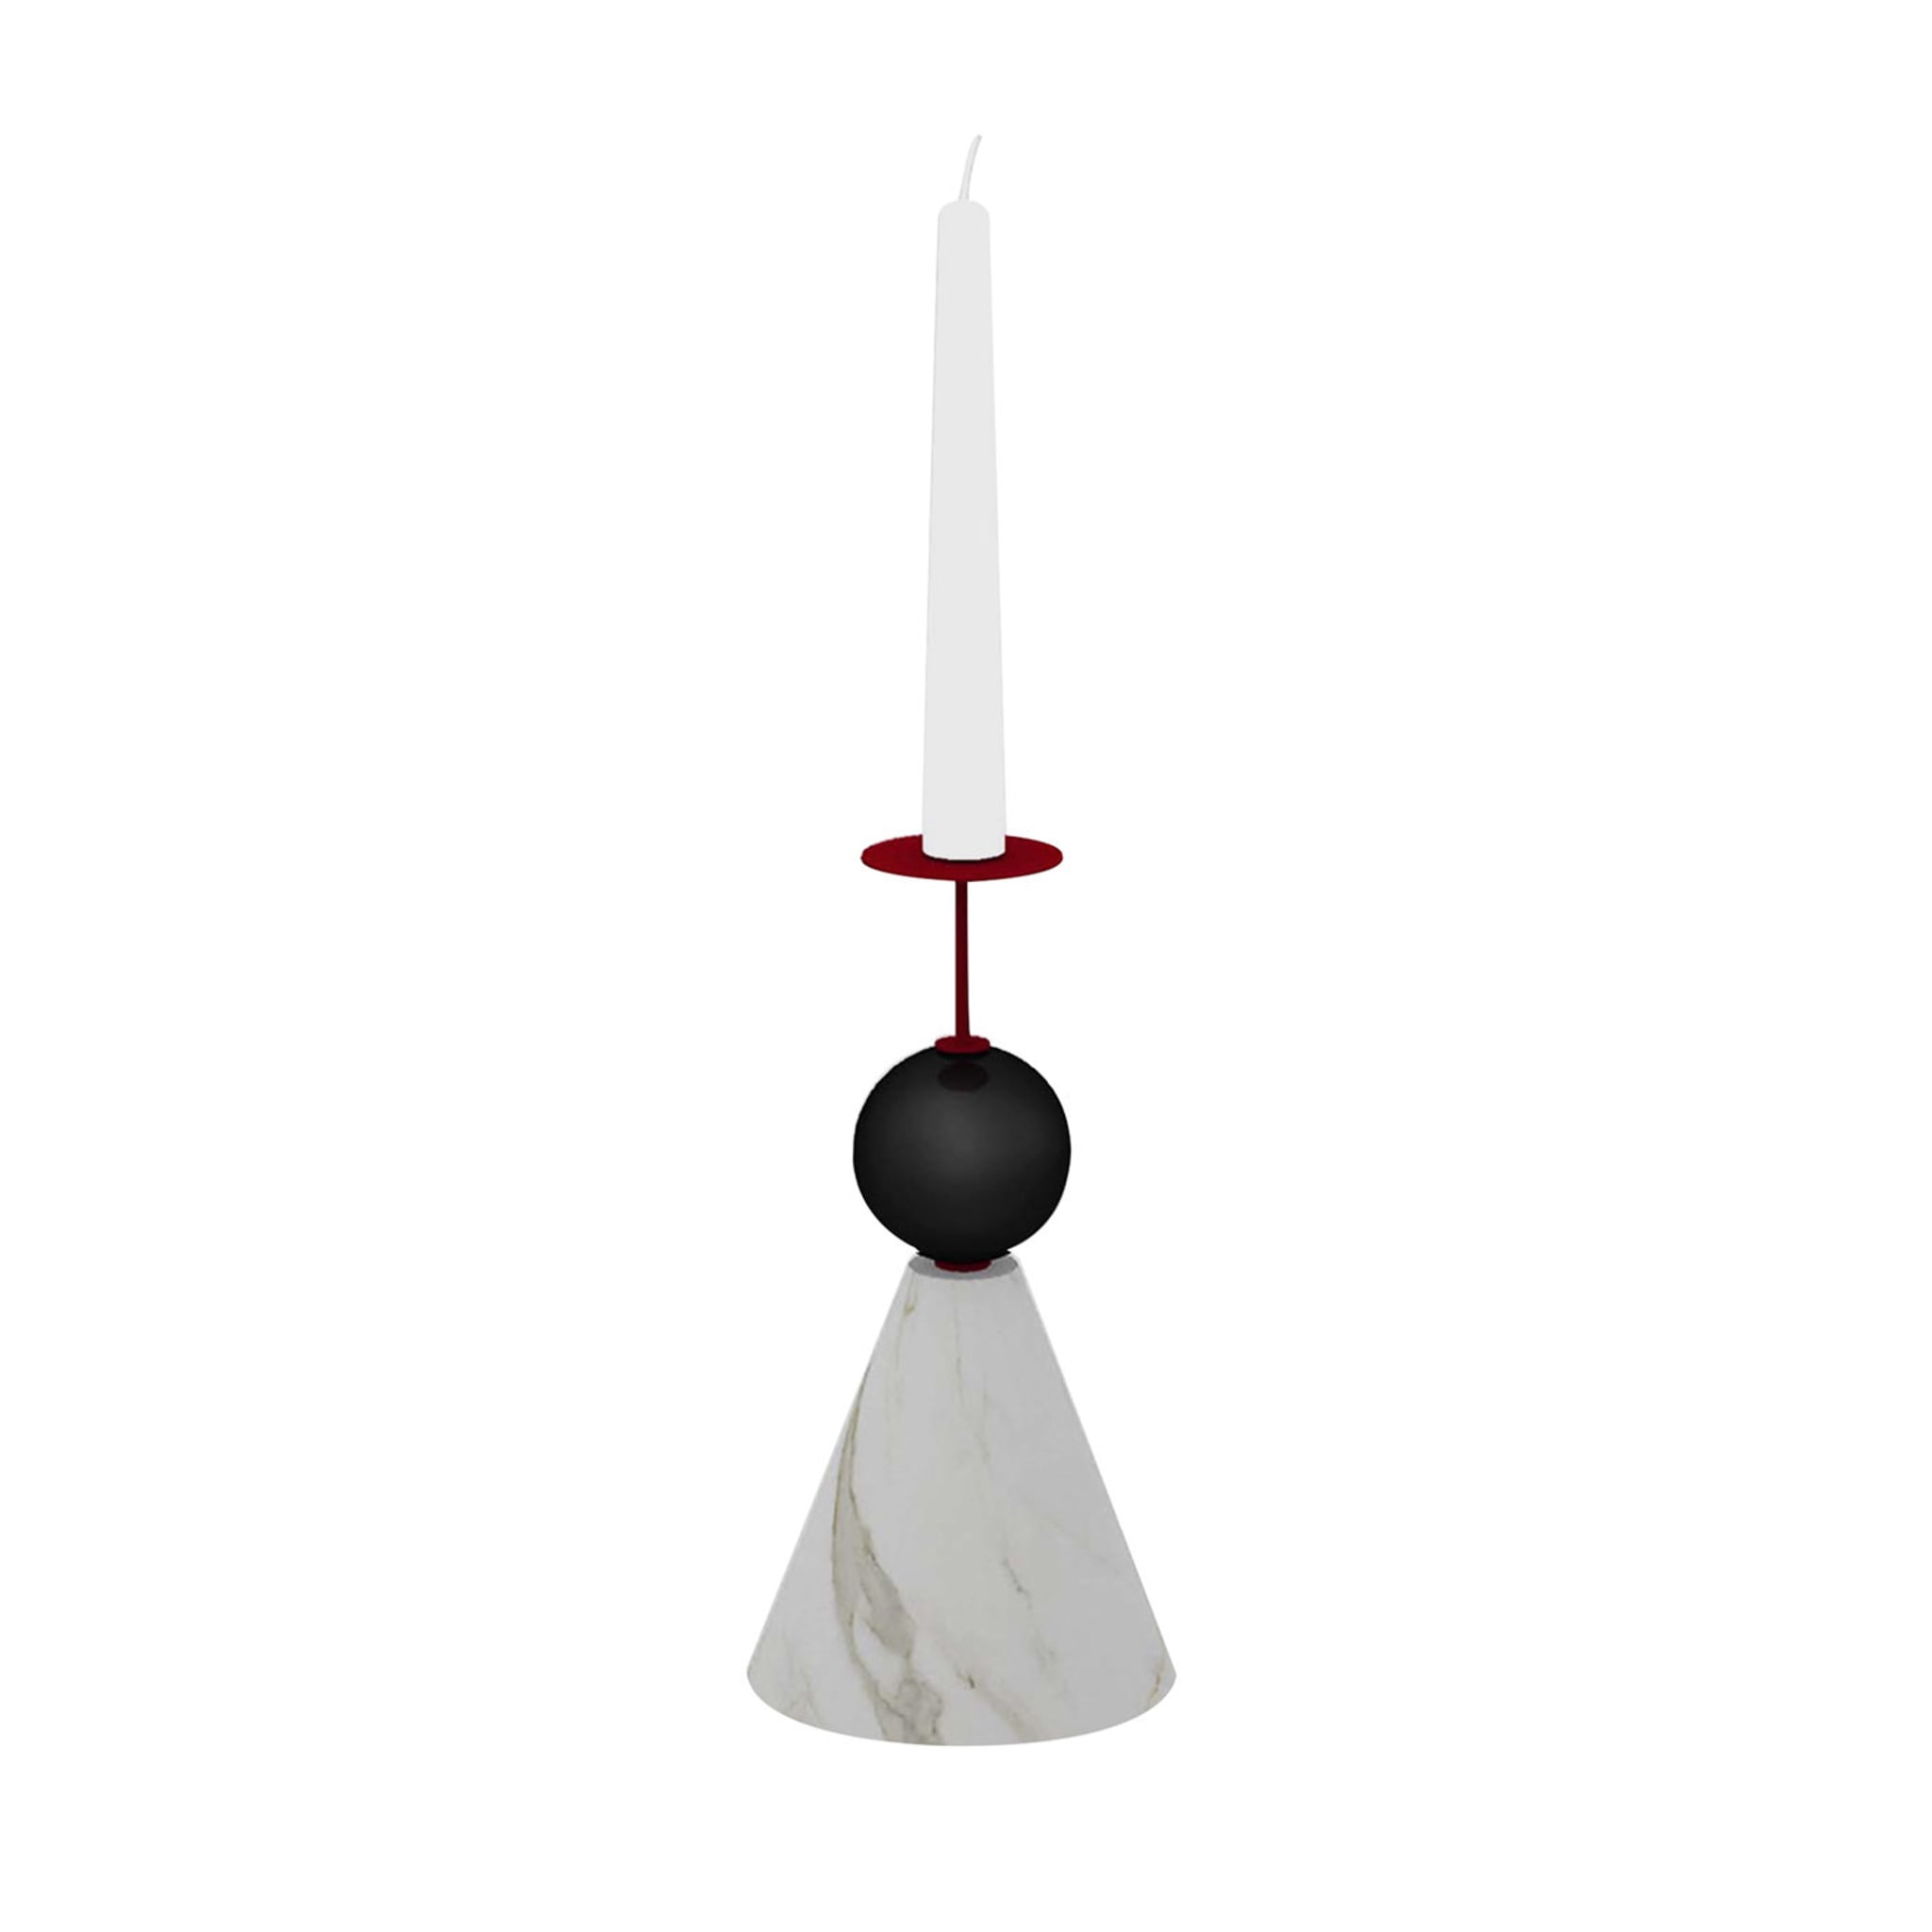 Raccontami White Carrara, Black and Red Conical Candle Holder - Main view